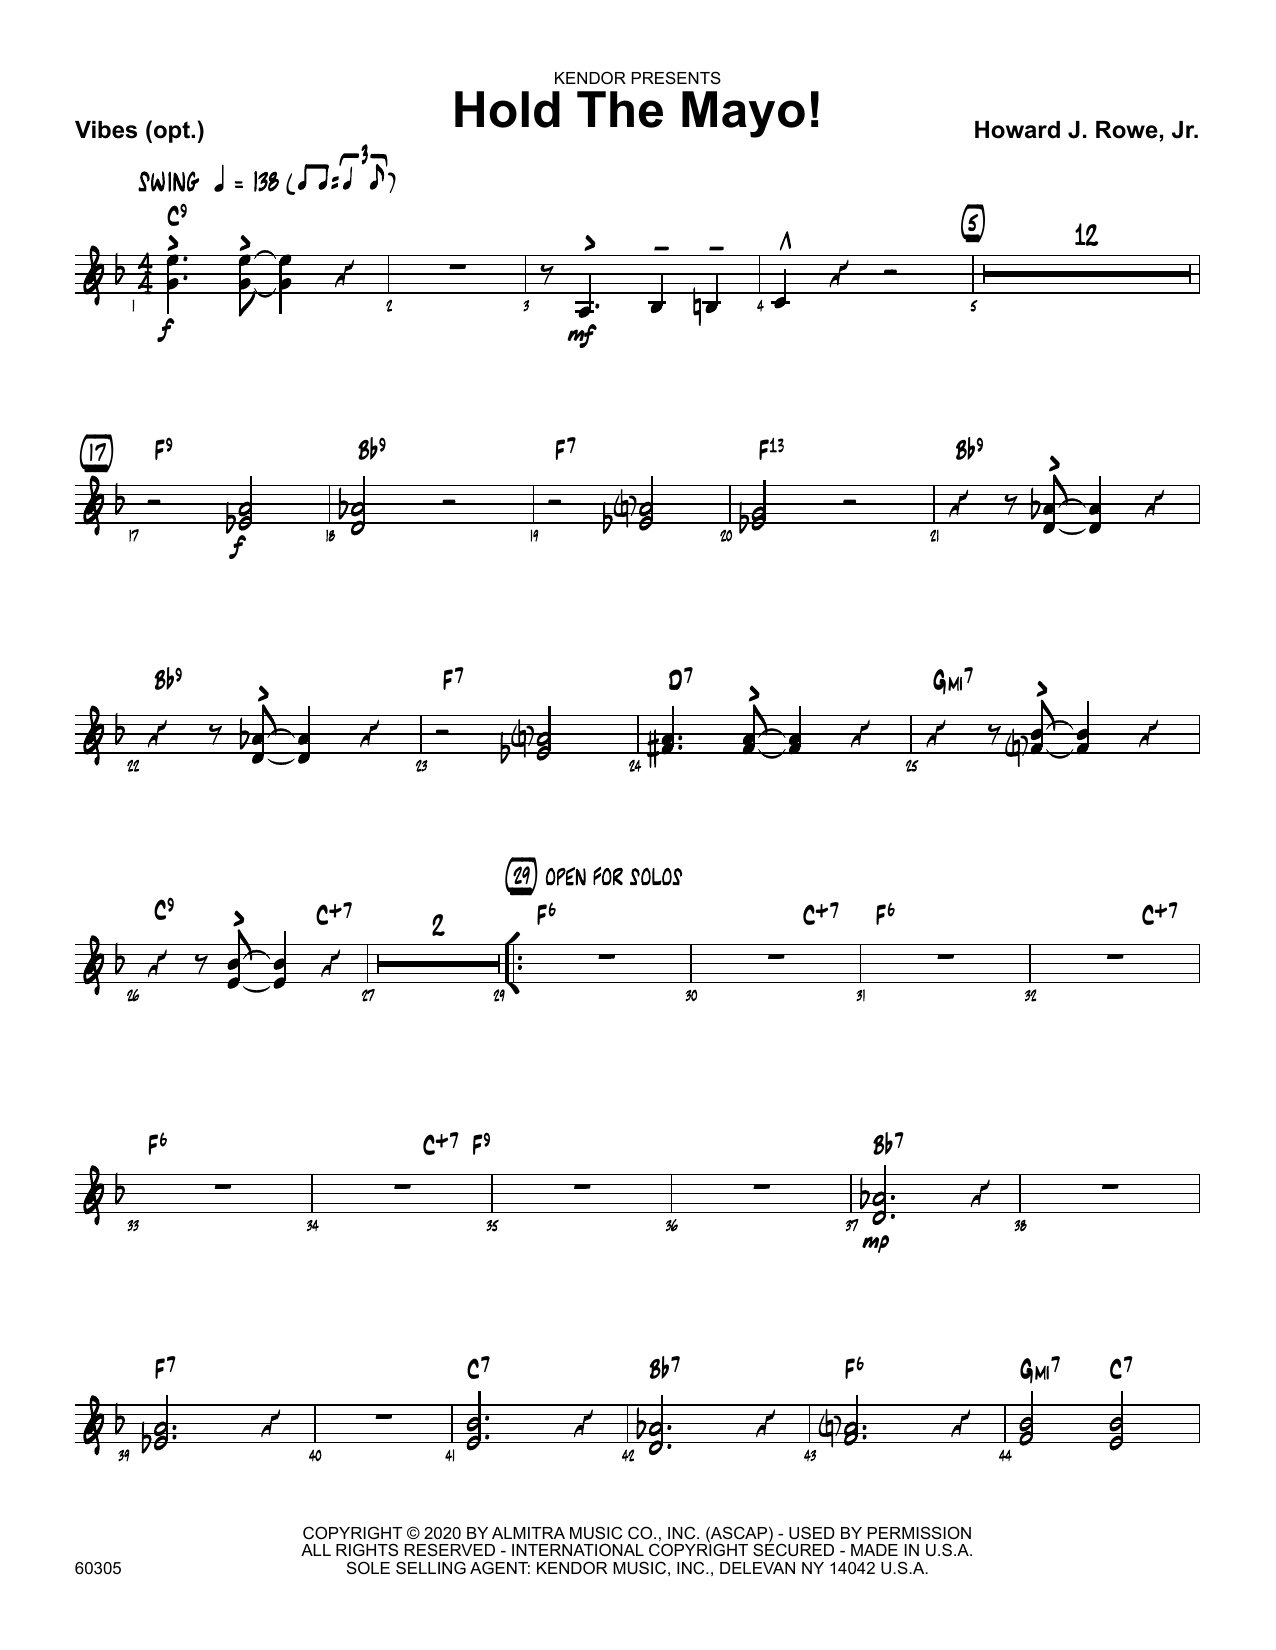 Download Howard Rowe Hold The Mayo! - Vibes Sheet Music